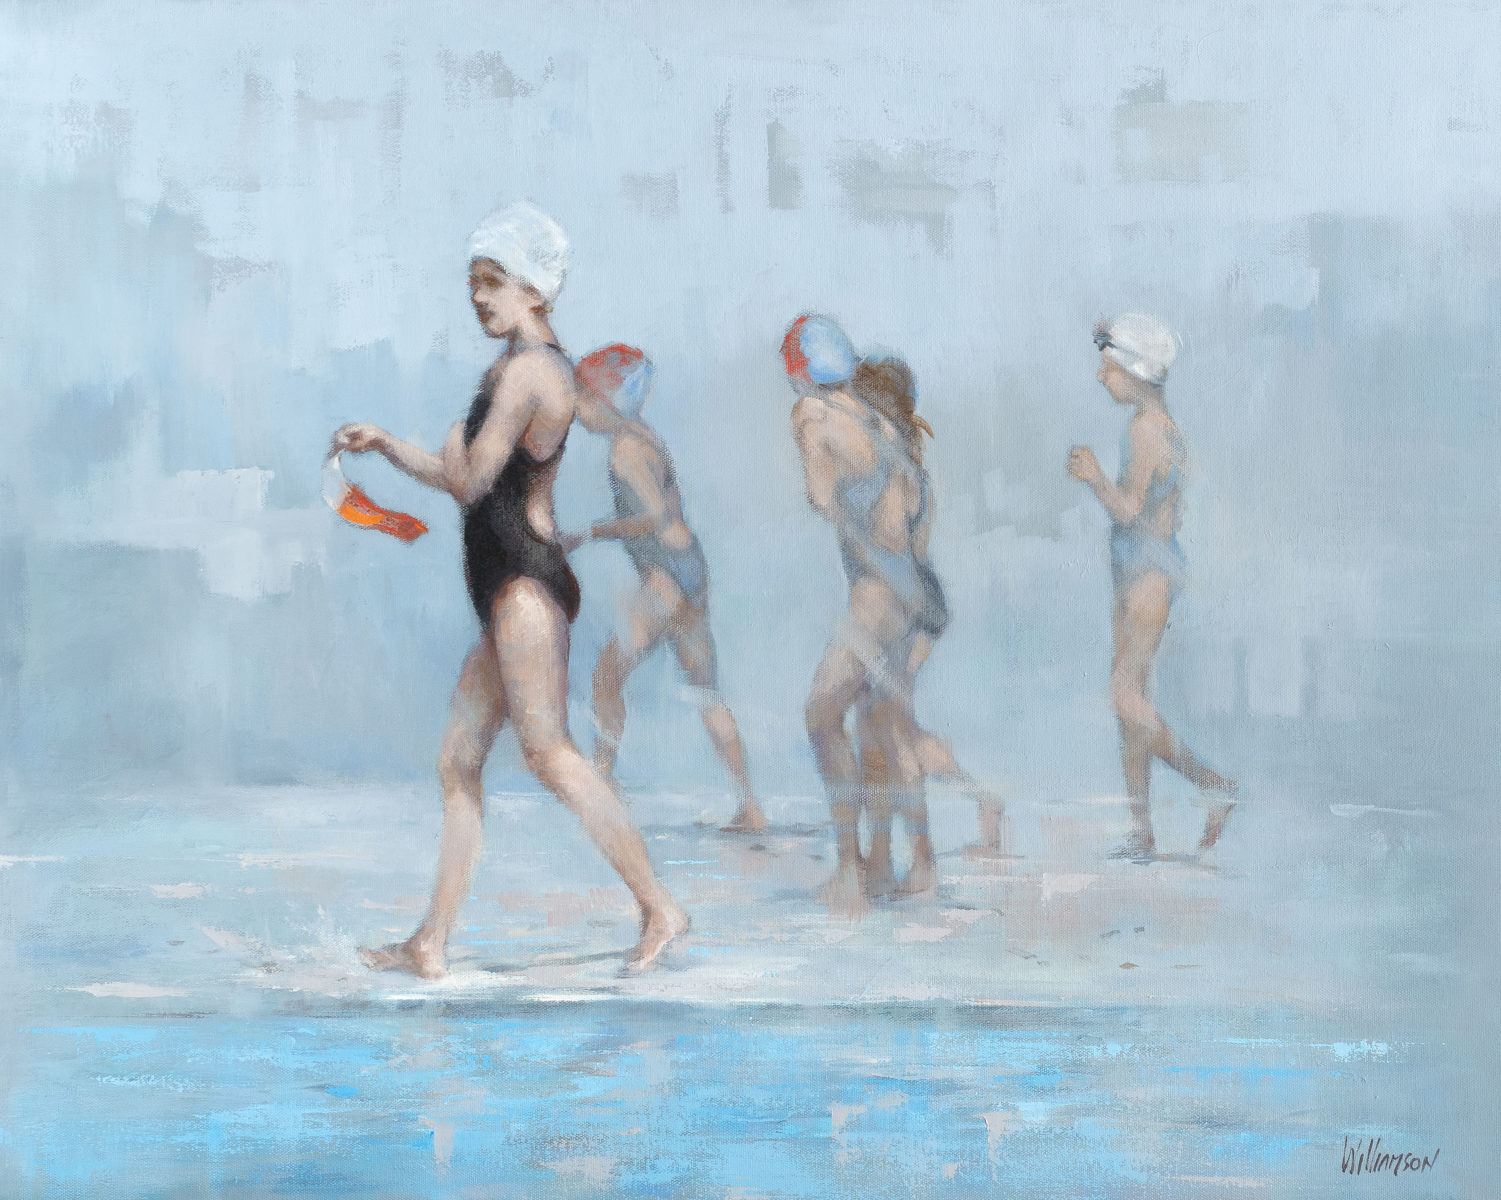 After the Race | Jan Williamson | Oil on canvas | 61 x 76 cm | $5,500